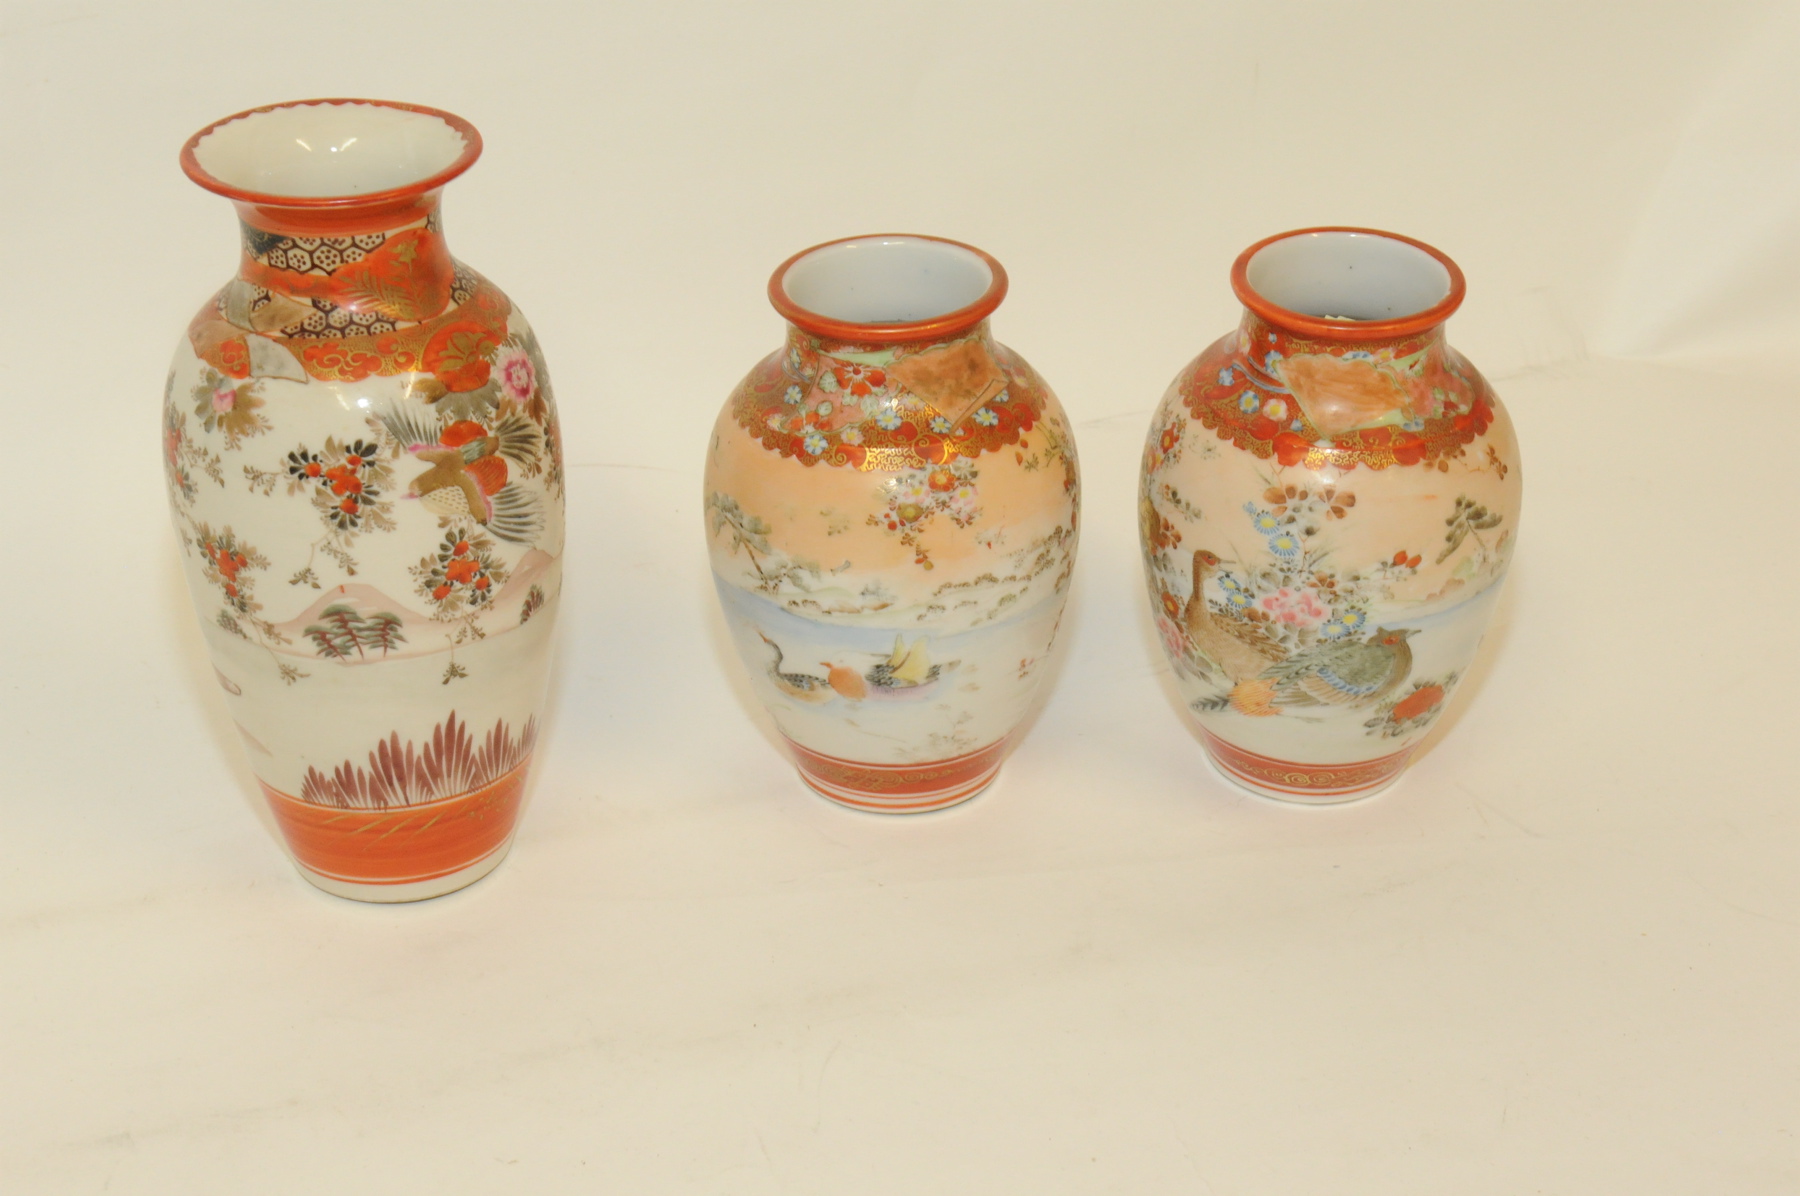 Pair of early 20th century Japanese porcelain Kutani vases of baluster form, each 6¼" high & another